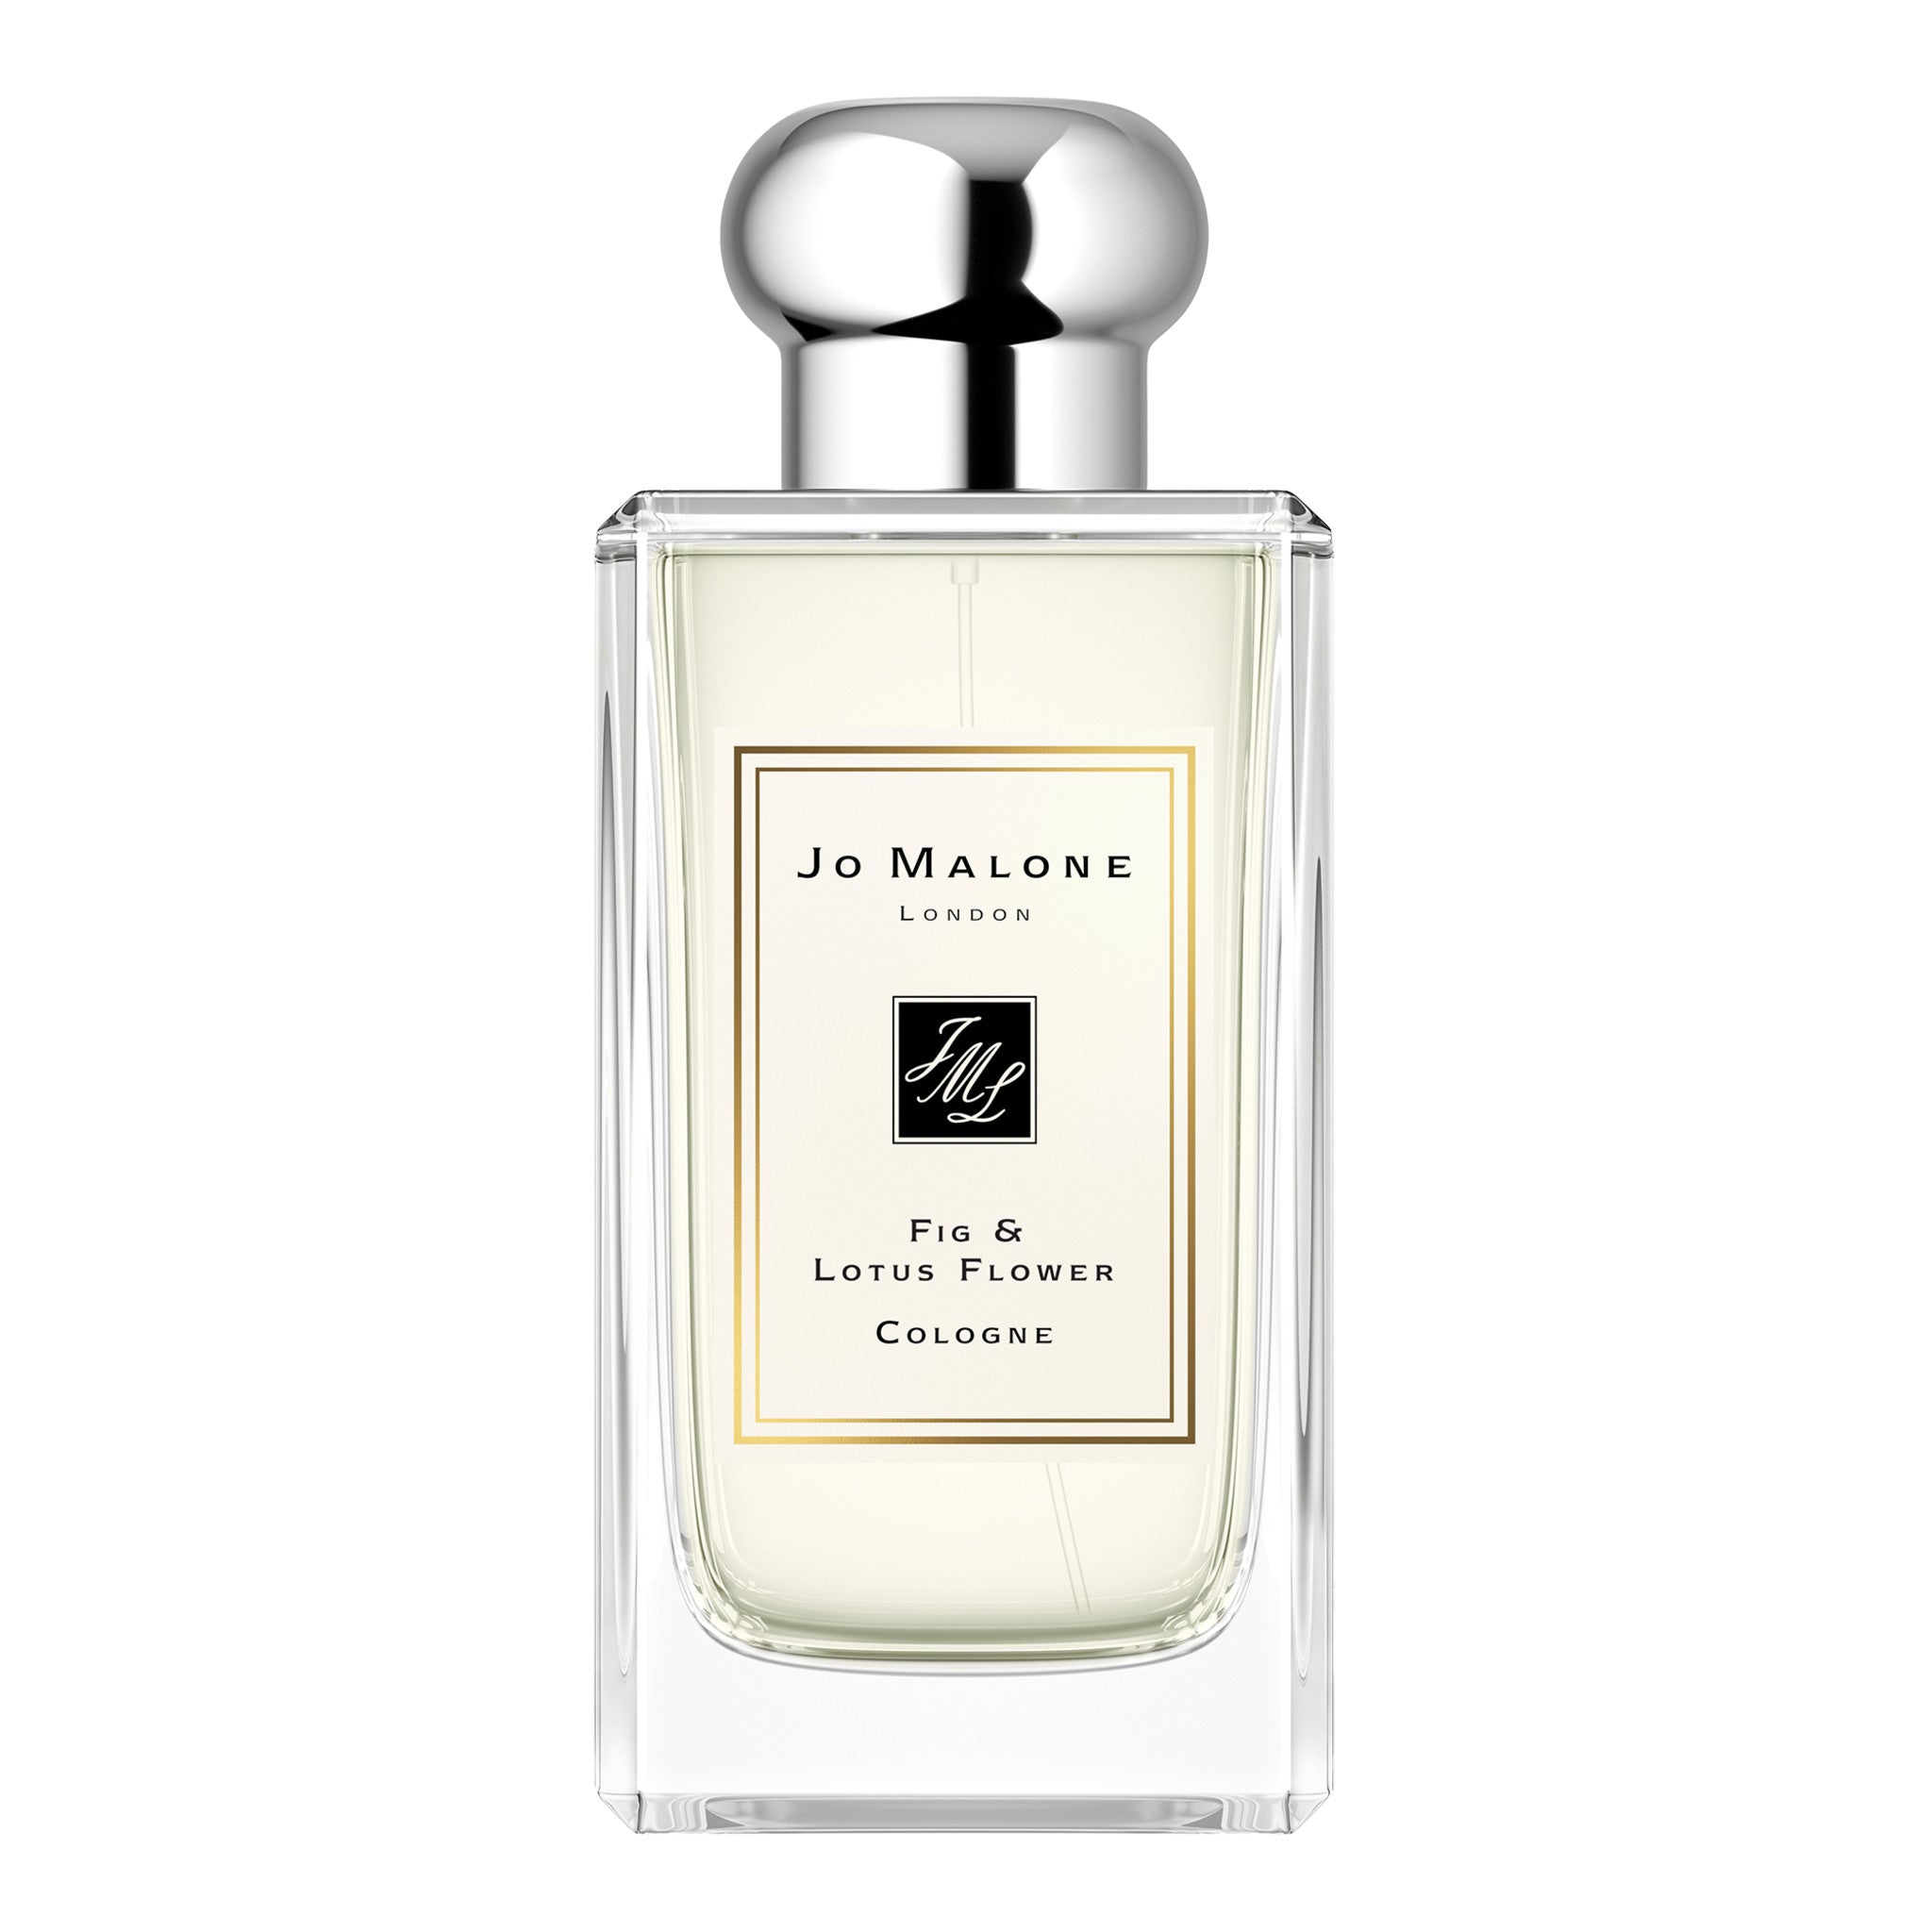 Jo Malone London Fig & Lotus Flower Cologne Size variant: 100 ML main image.